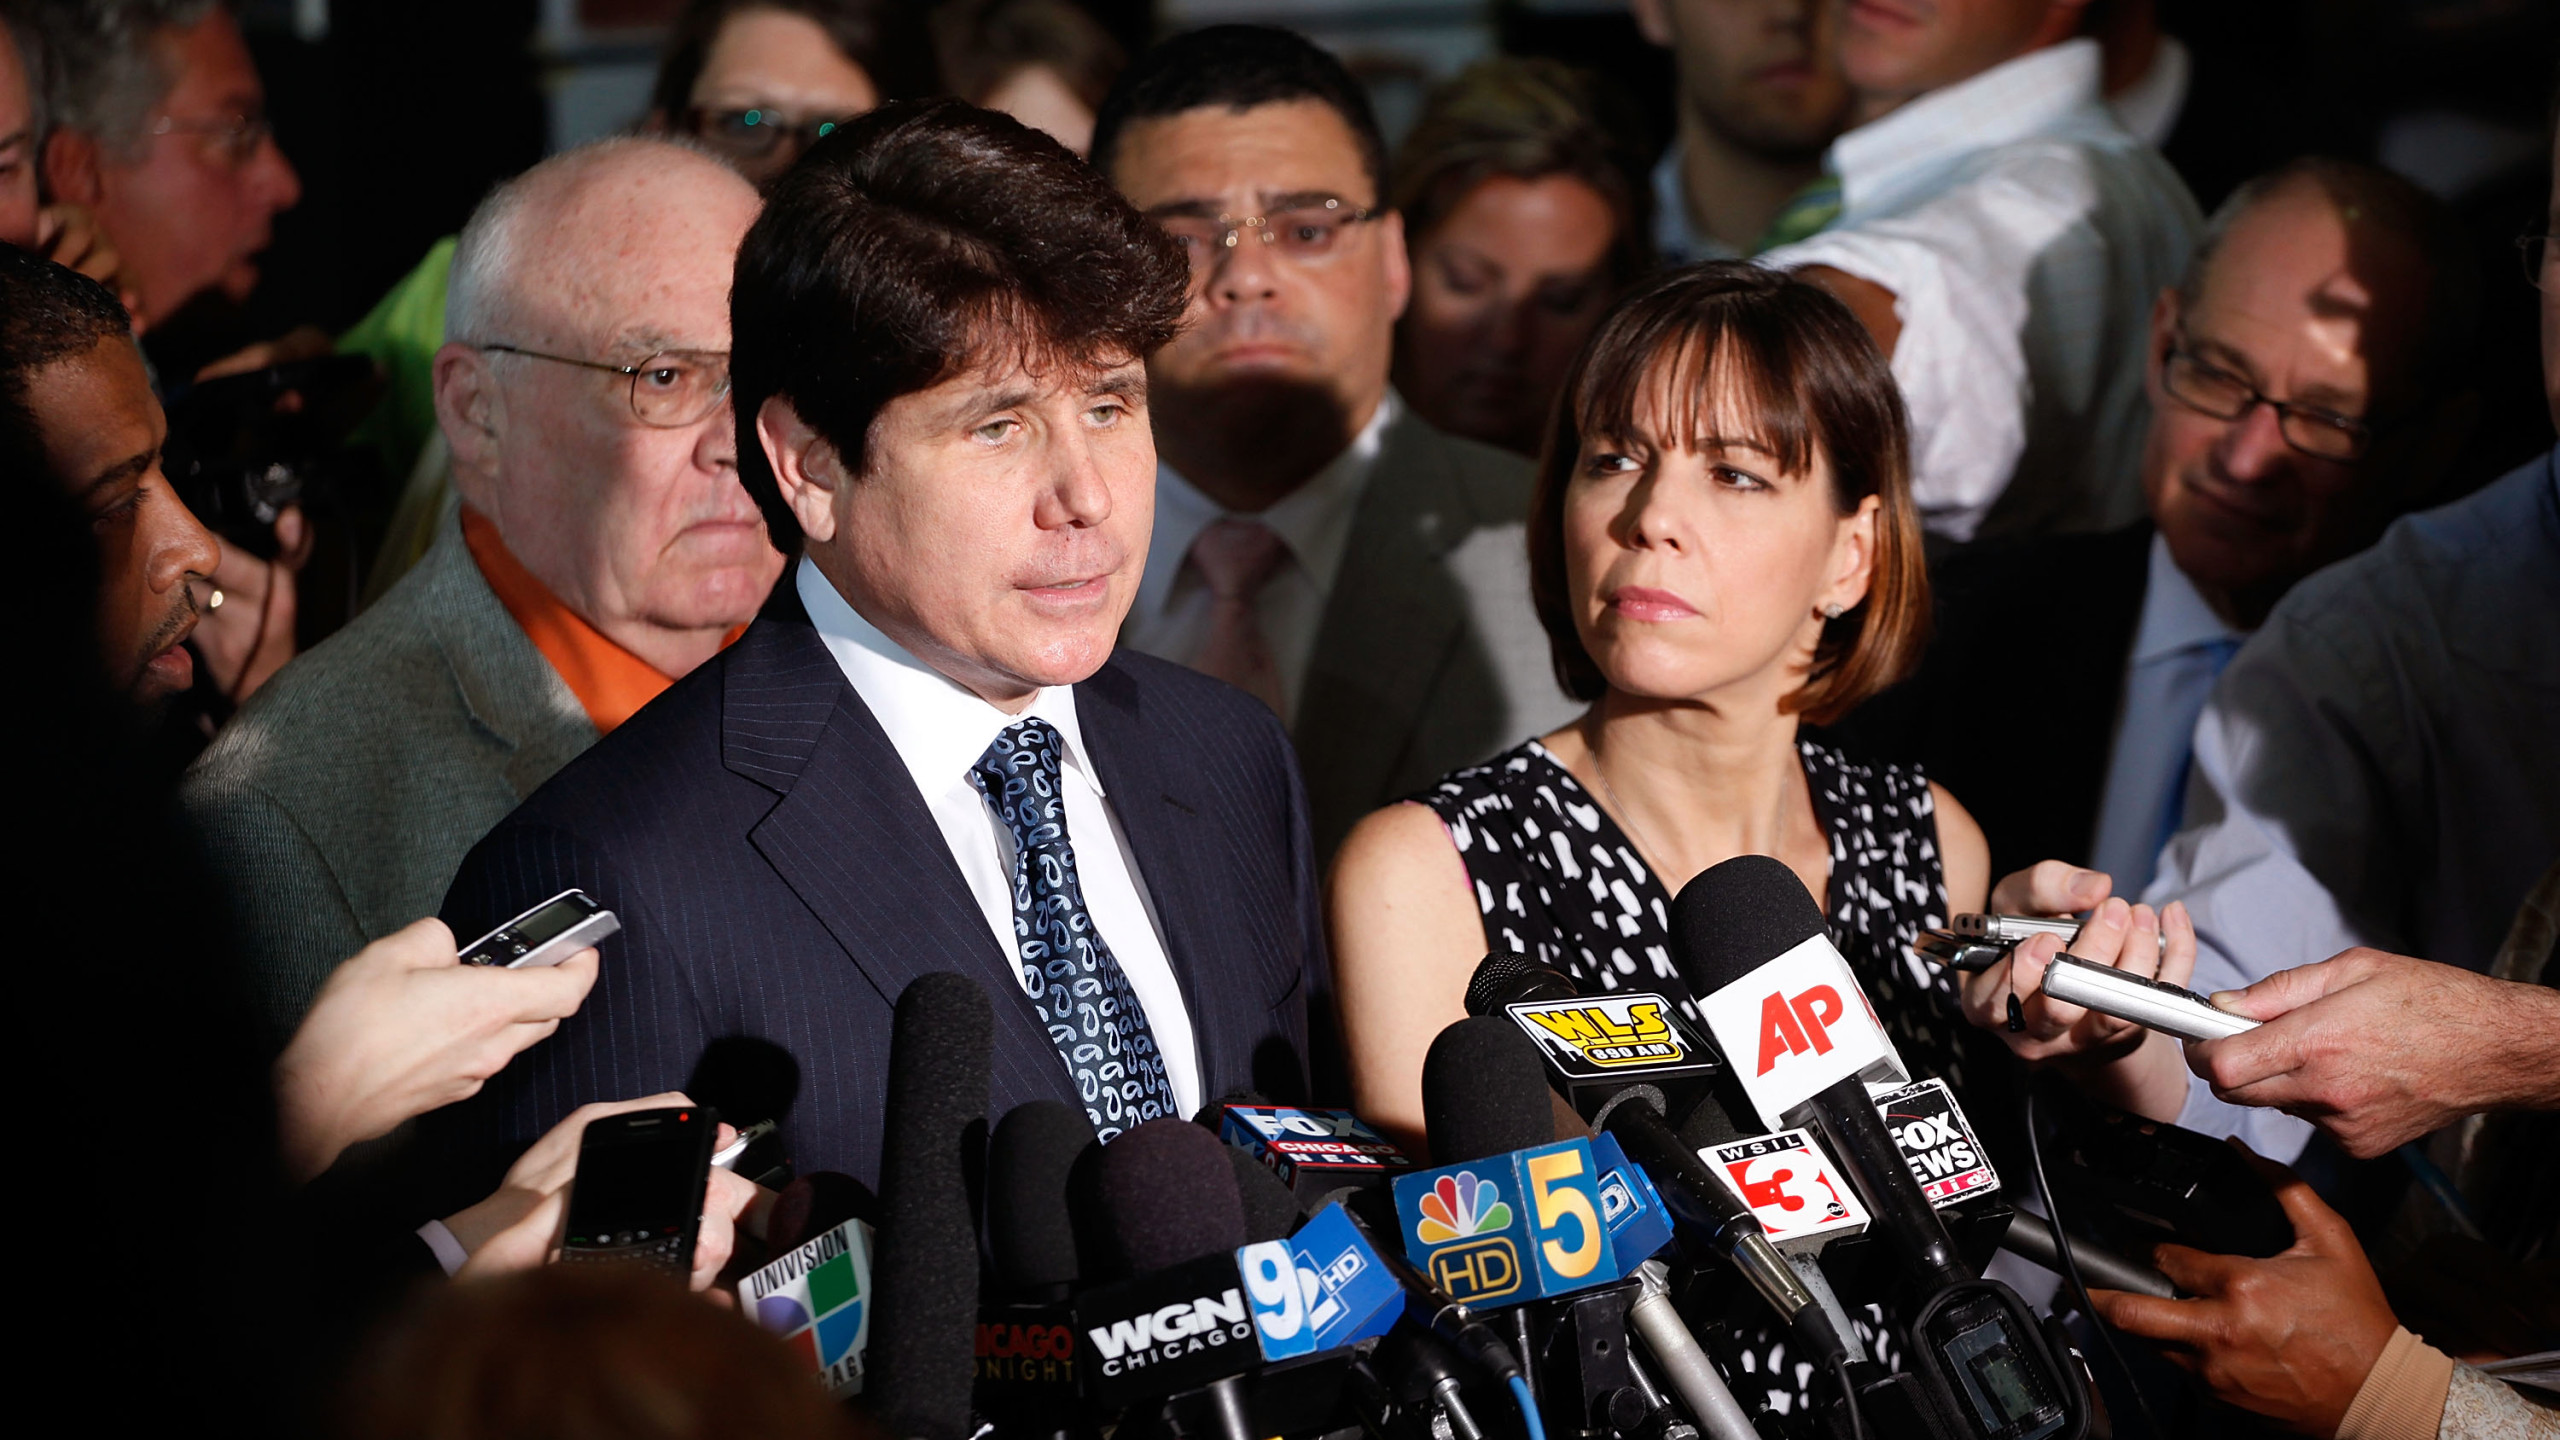 Trump Getting Facts Wrong Says He May Blagojevich Wishtv